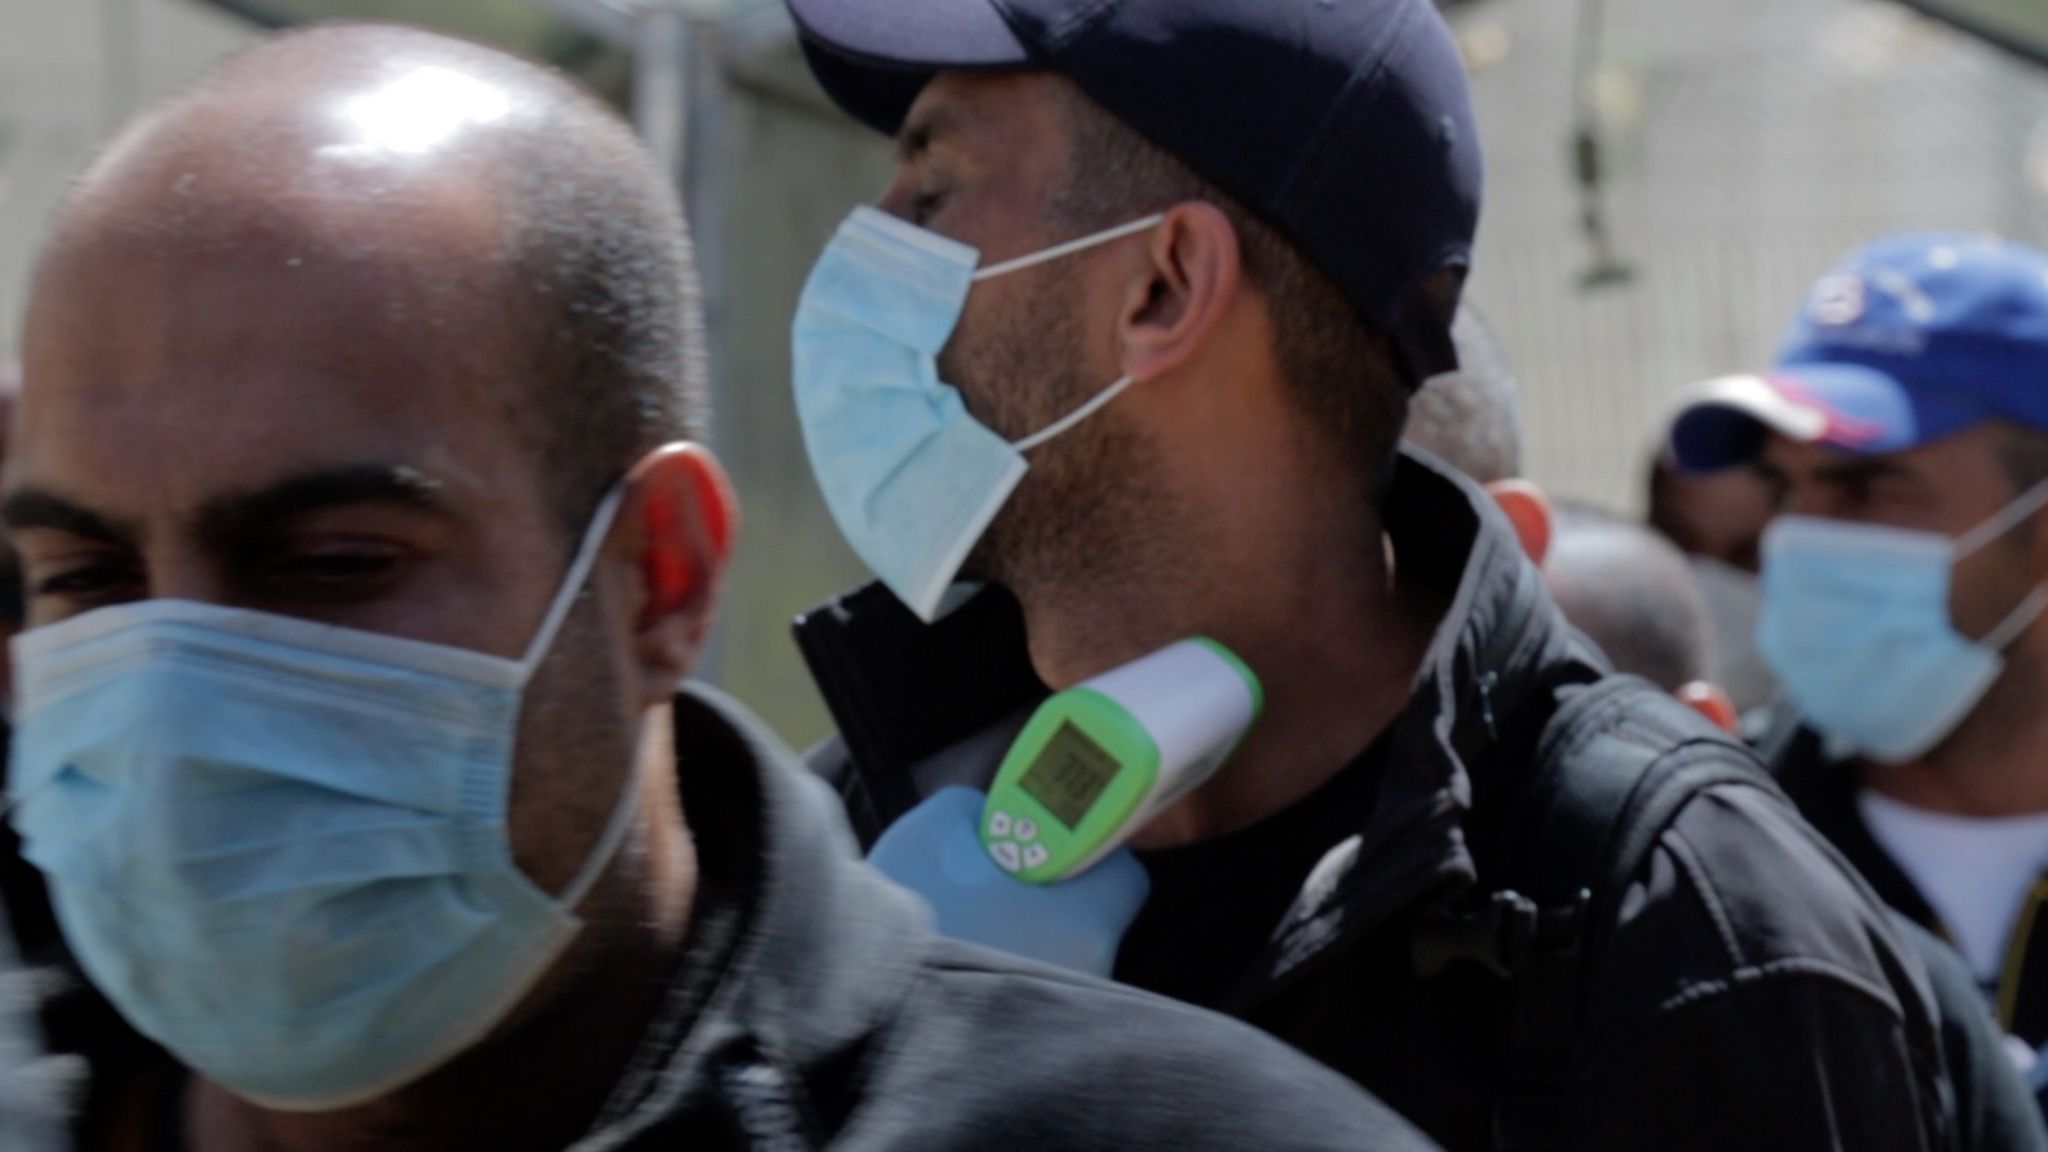 Palestinian medical workers check the temperatures of workers crossing at the Tarqumiya checkpoint, near the West Bank city of Hebron